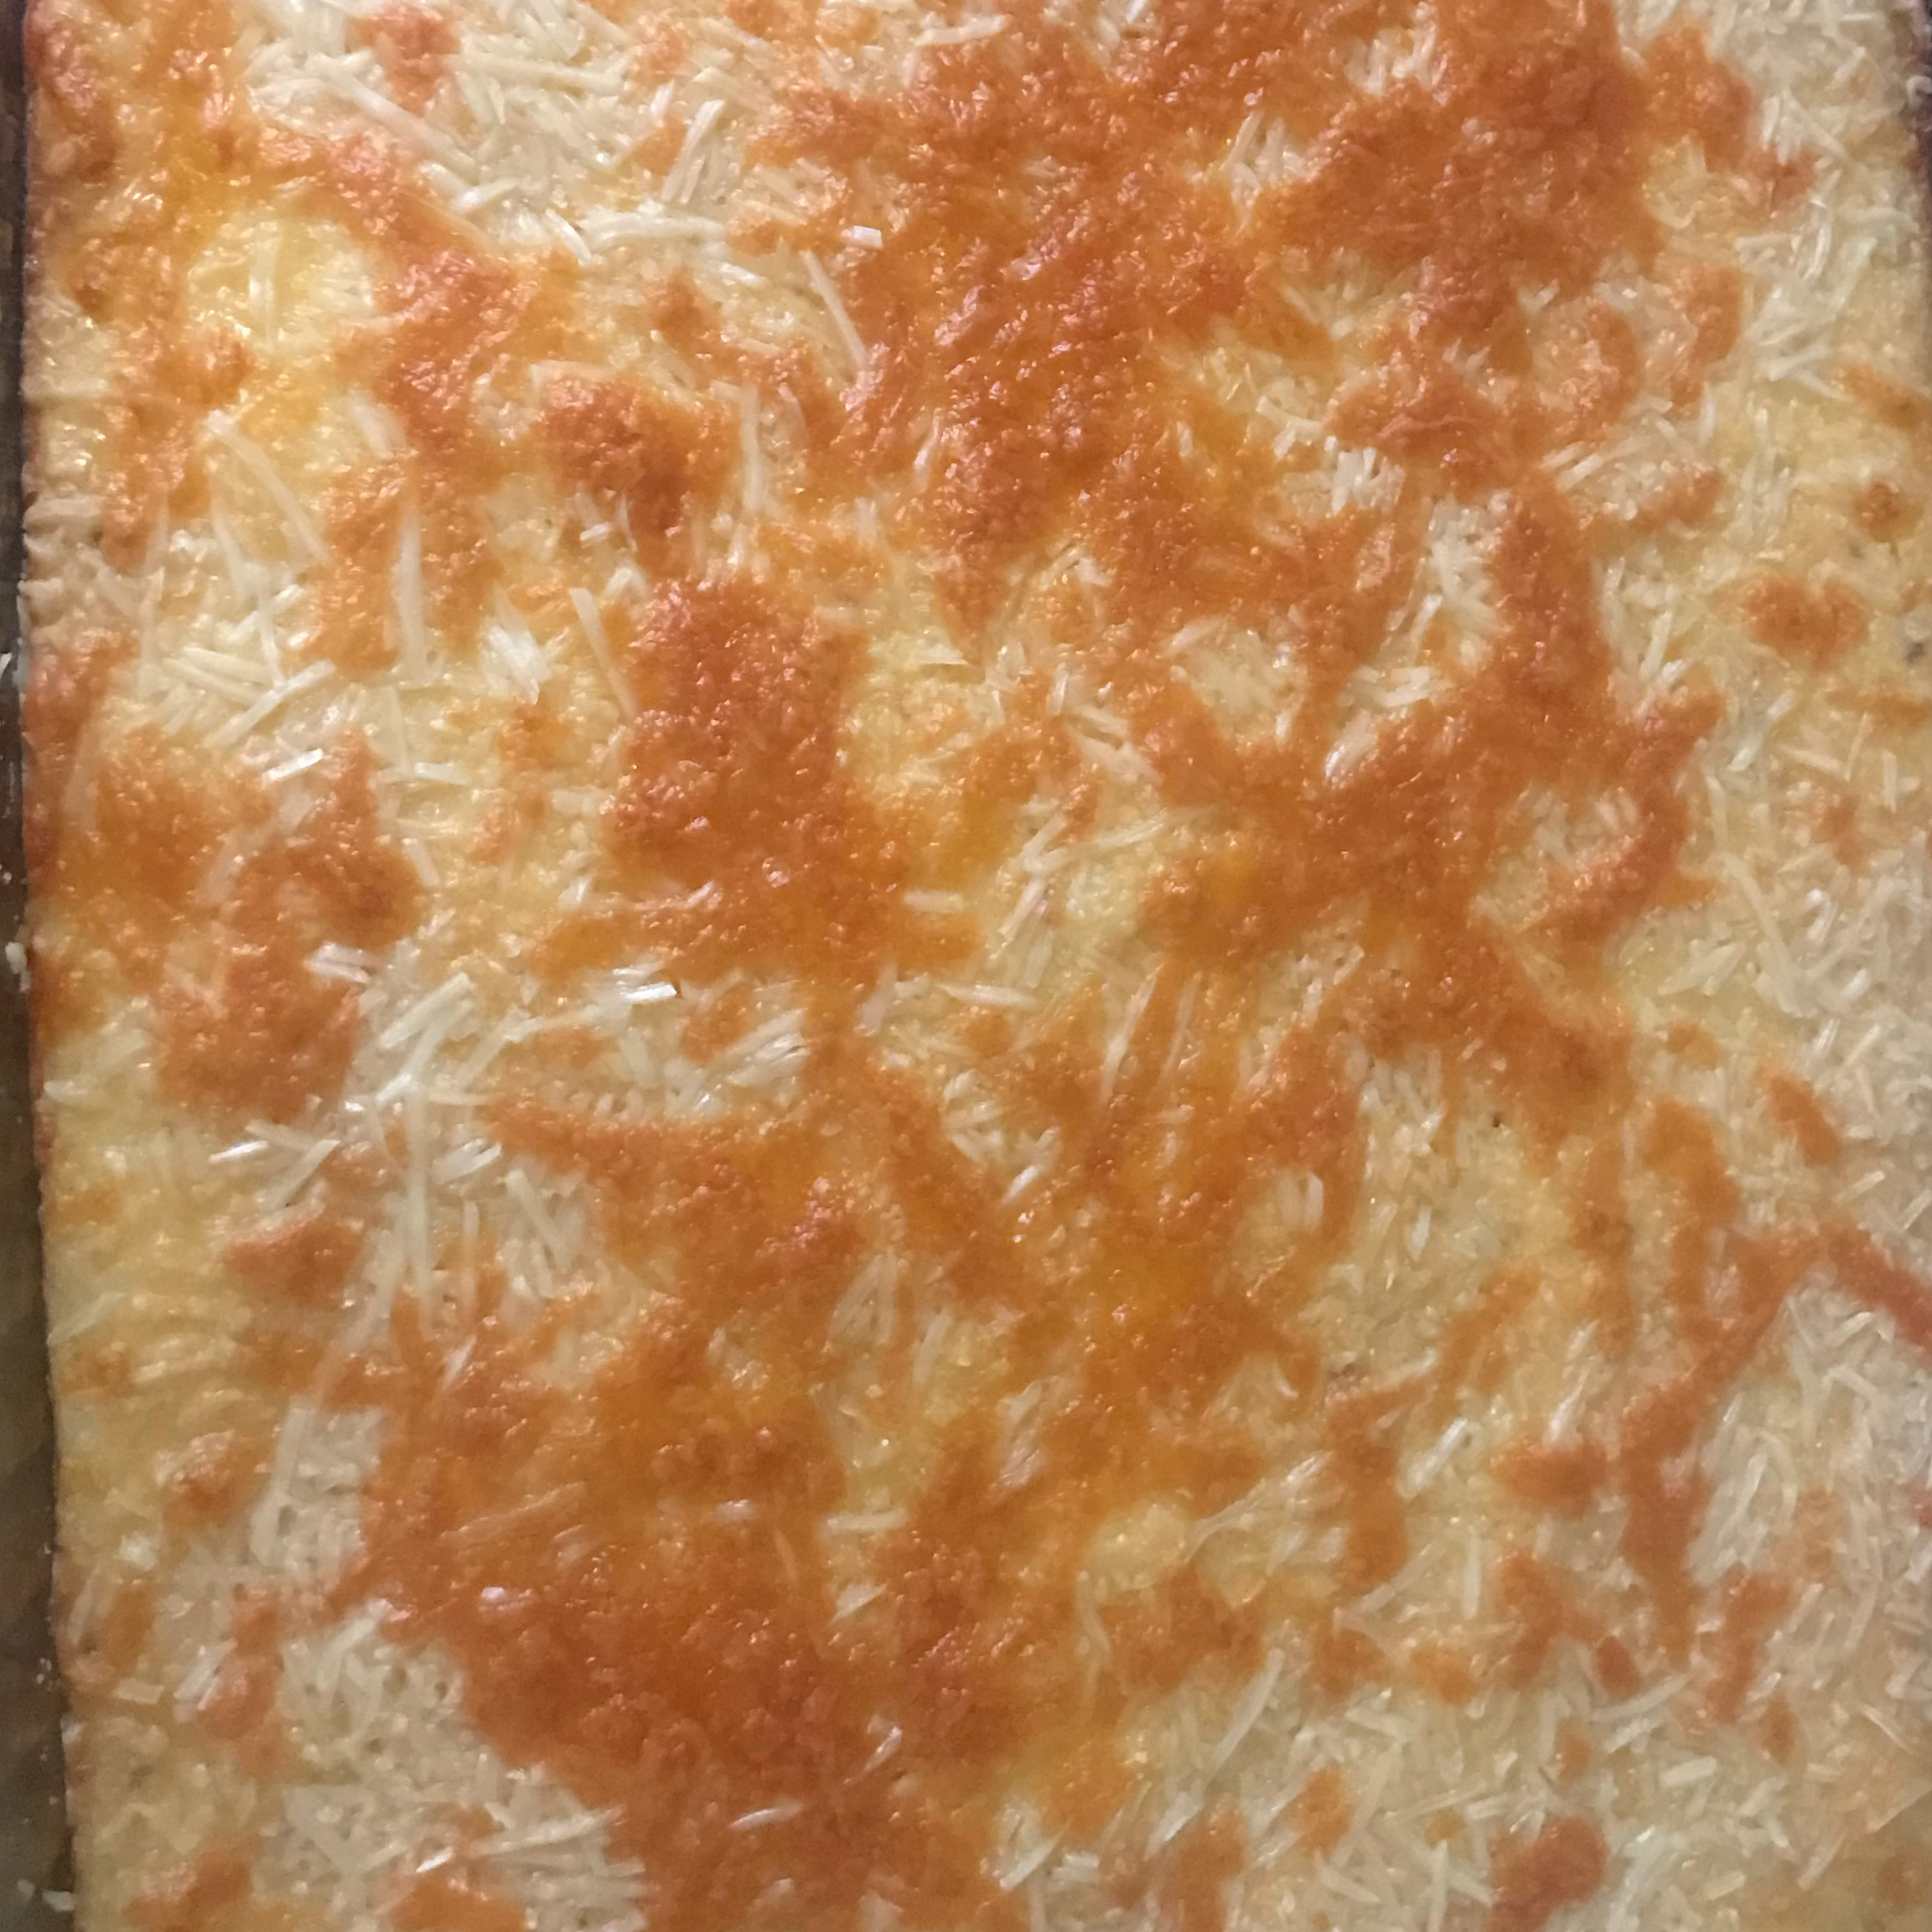 Cheesy Baked Grits